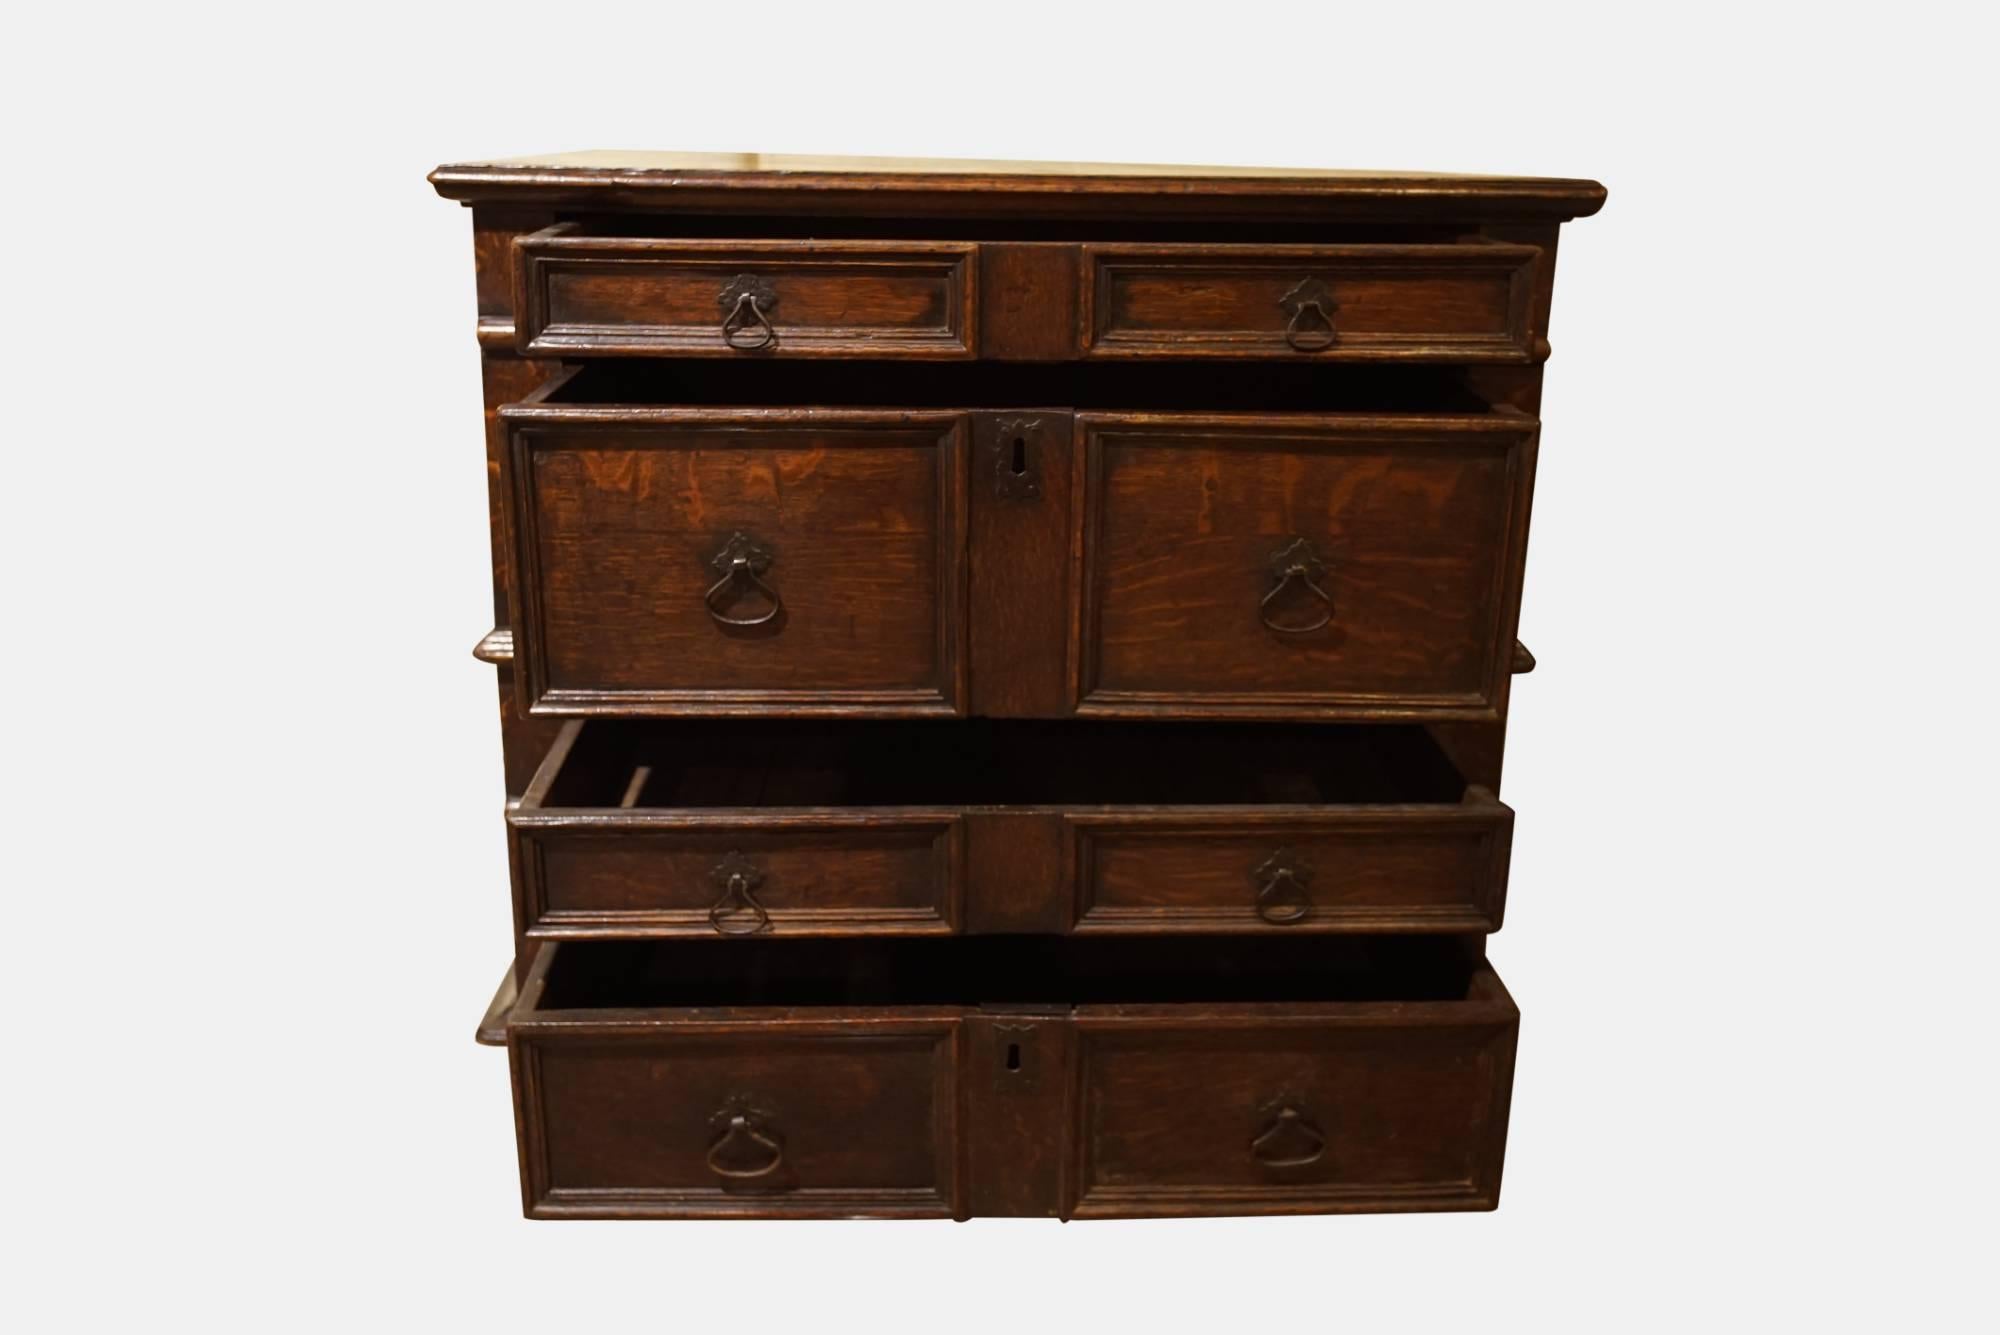 Good color early 18th century oak chest of drawers. Four graduated drawers with applied moldings. Splits into two.